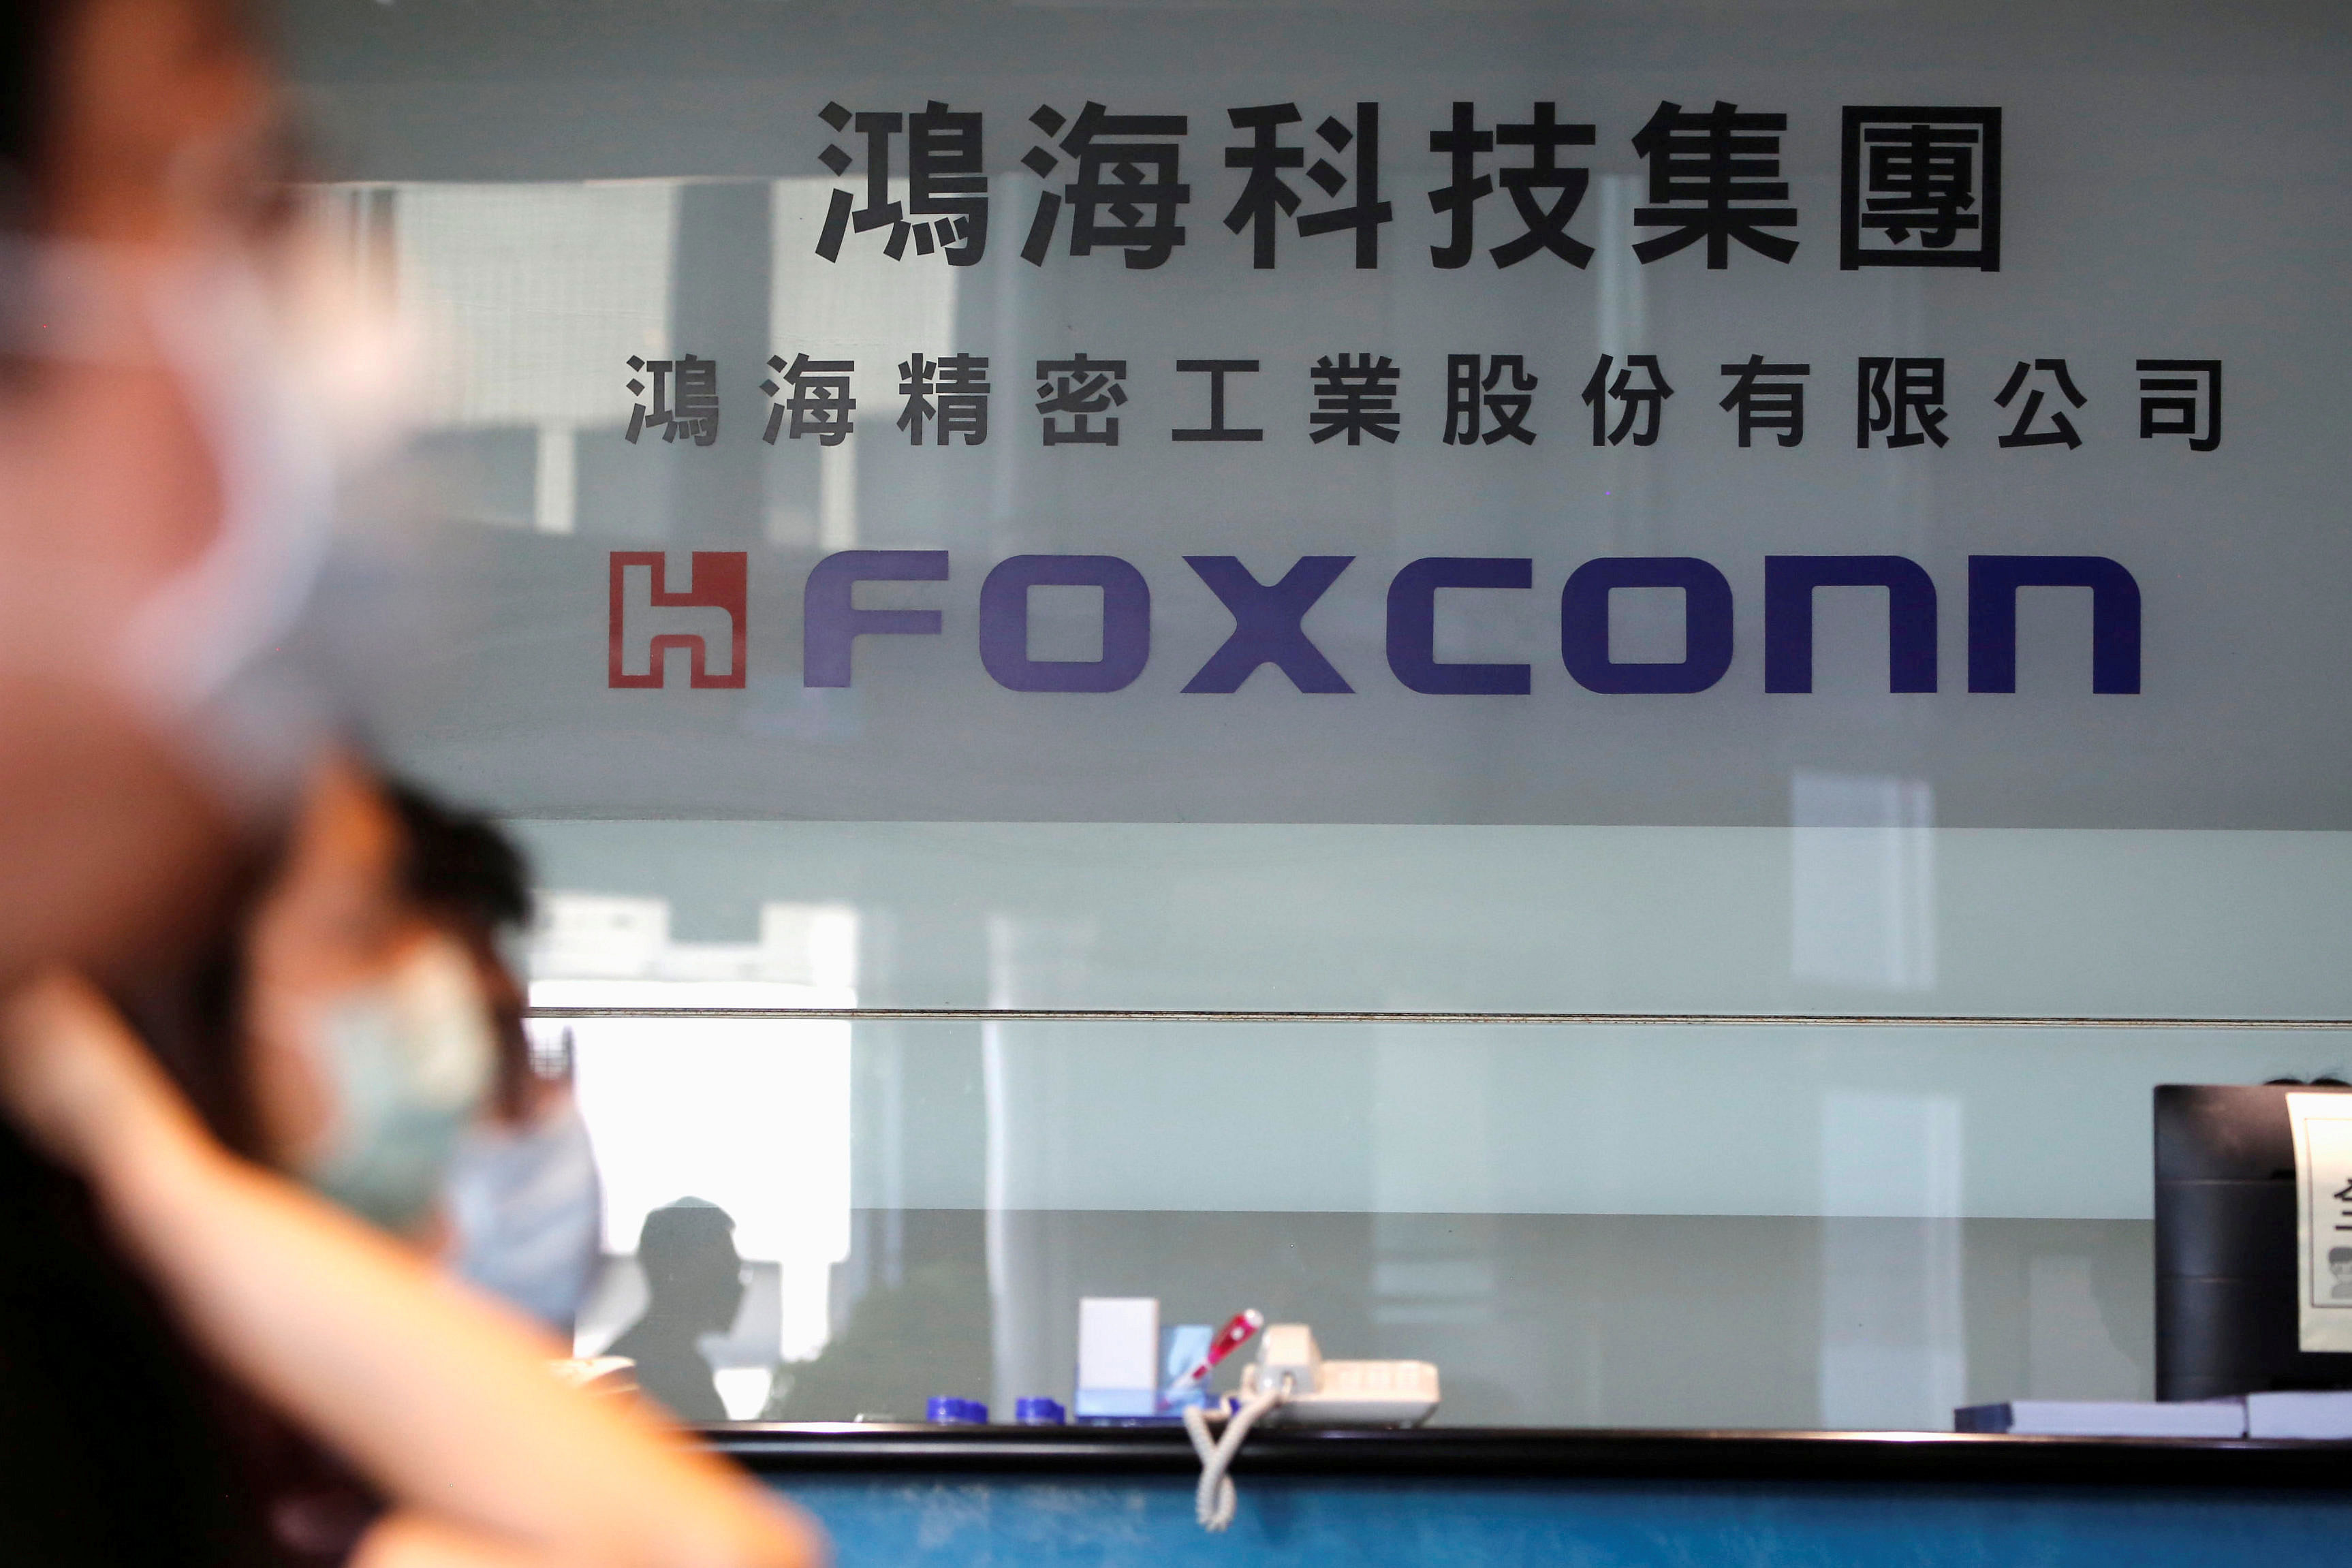 The lobby of Foxconn's office in Taipei, Taiwan. Credits: Reuters Photo